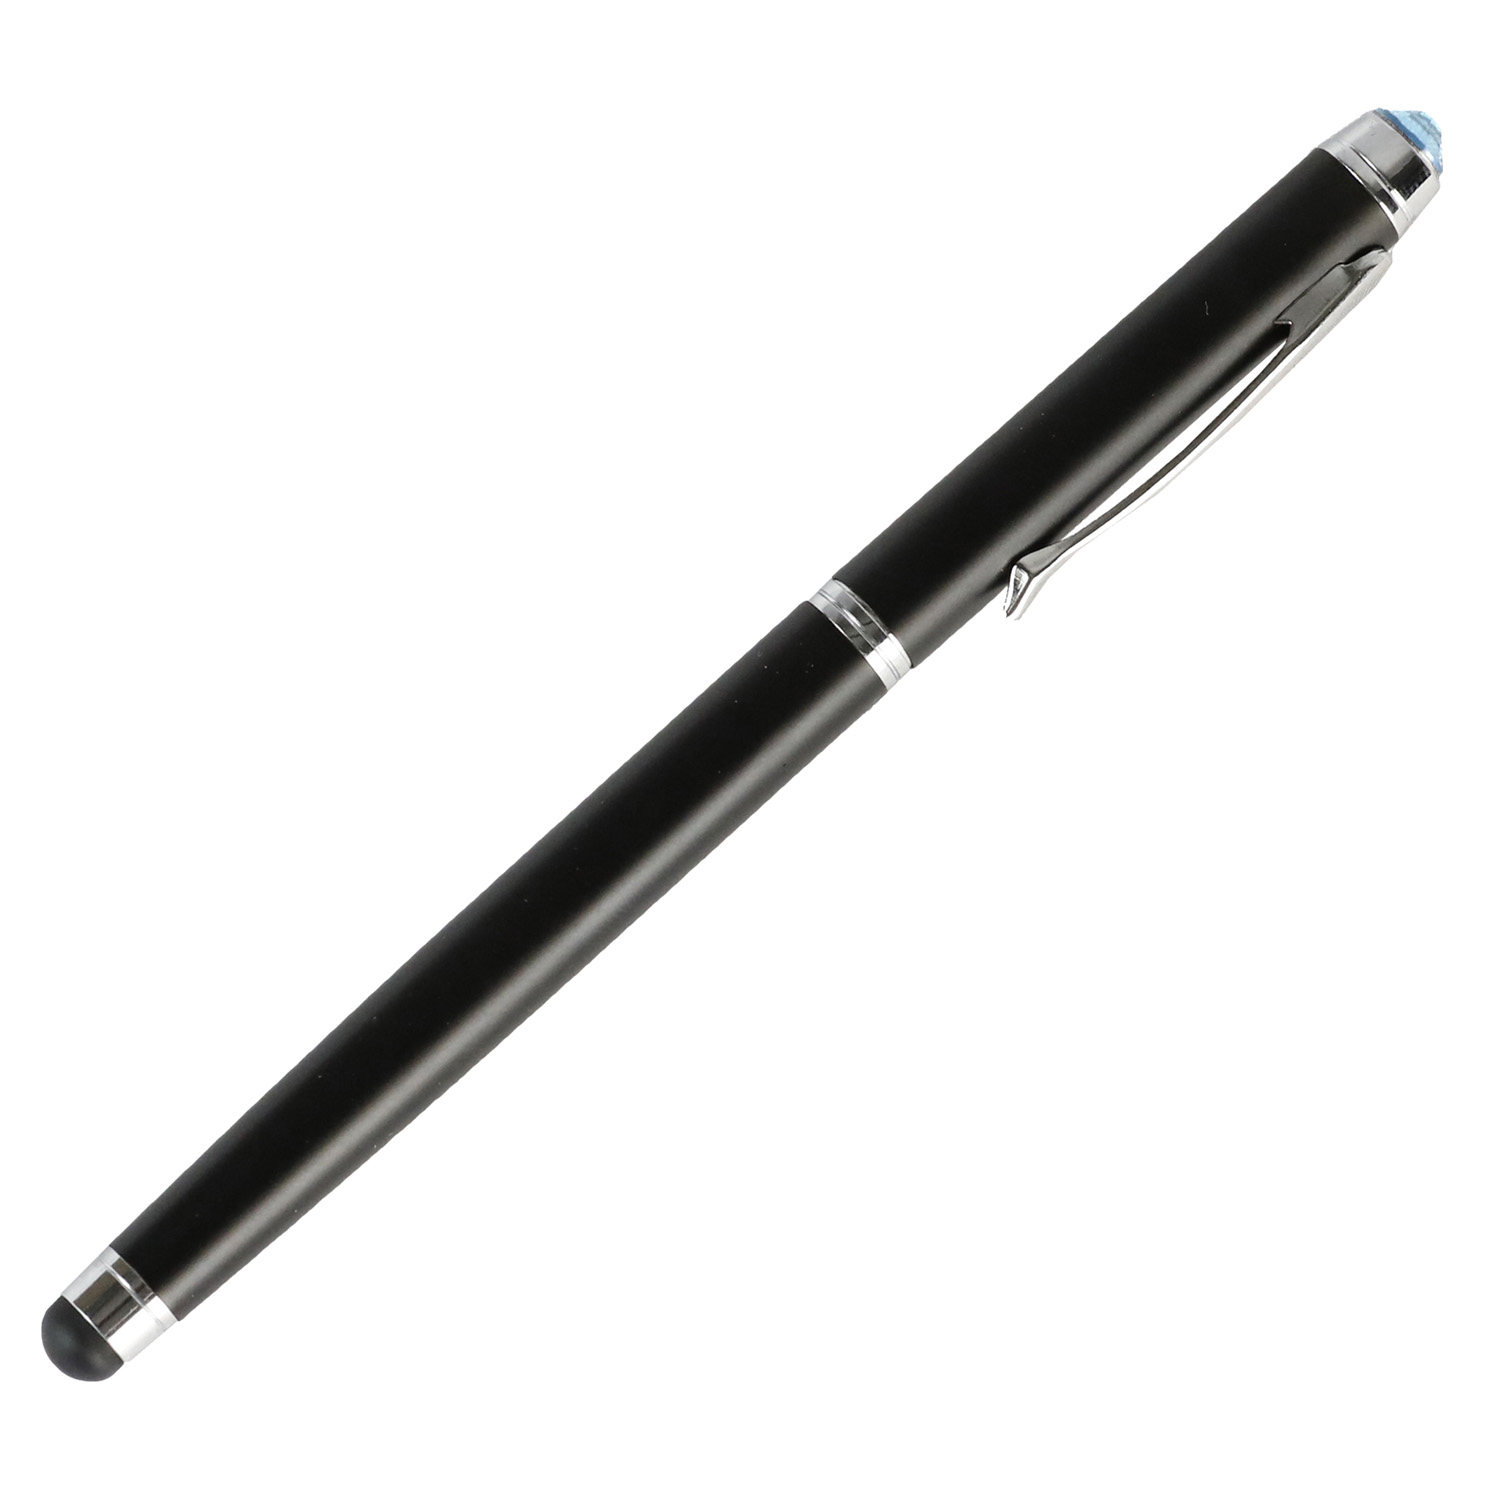 Universal Stylus Pen - Touch Screen with Gem for Iphone Ipad Tablet Smartphones - Aquamarine